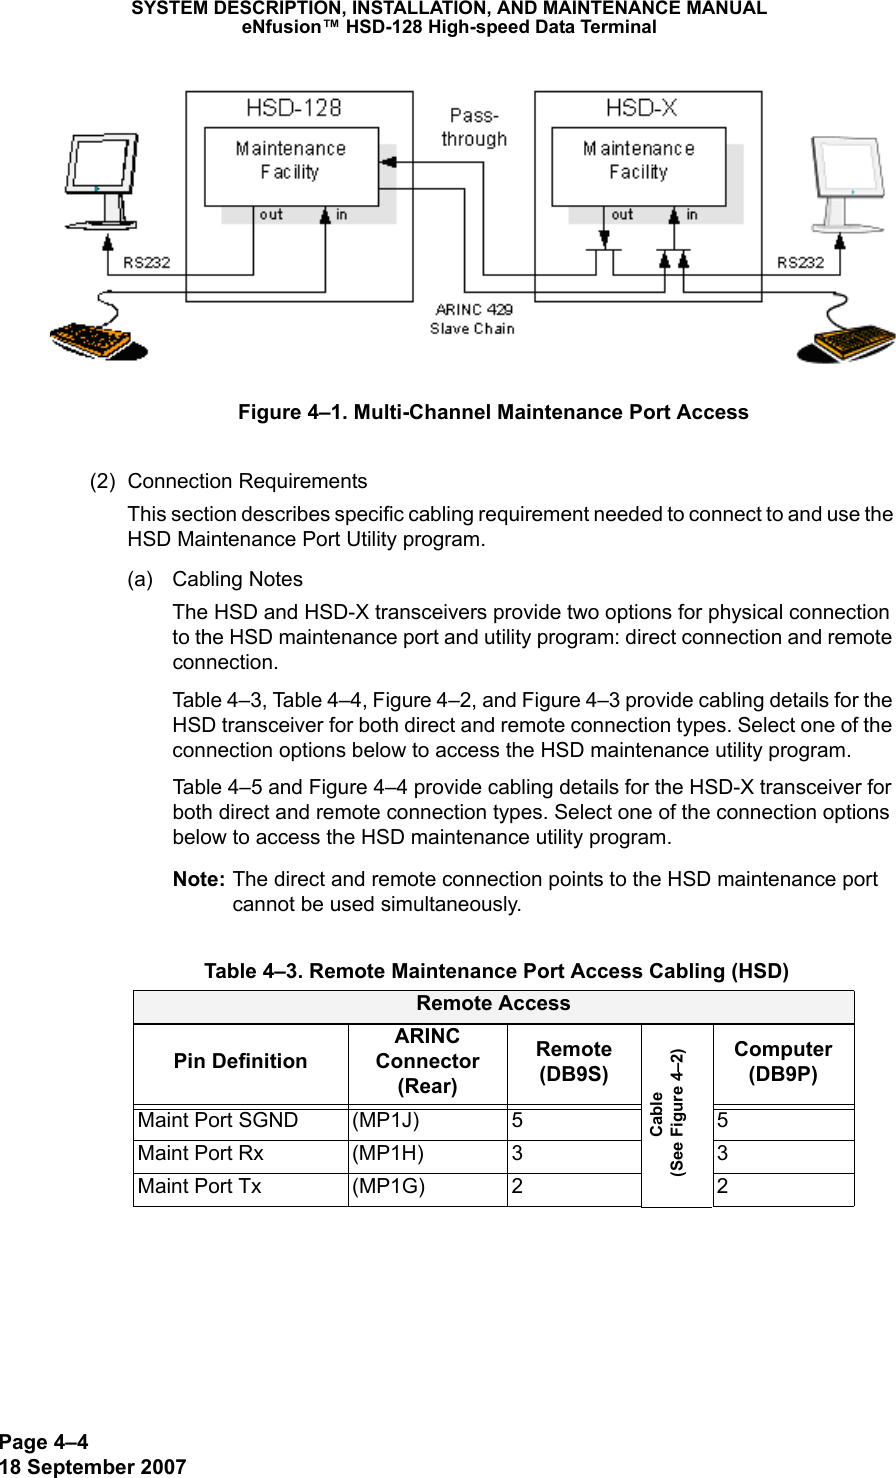 Page 4–418 September 2007SYSTEM DESCRIPTION, INSTALLATION, AND MAINTENANCE MANUALeNfusion™ HSD-128 High-speed Data TerminalFigure 4–1. Multi-Channel Maintenance Port Access(2) Connection RequirementsThis section describes specific cabling requirement needed to connect to and use the HSD Maintenance Port Utility program.(a) Cabling NotesThe HSD and HSD-X transceivers provide two options for physical connection to the HSD maintenance port and utility program: direct connection and remote connection. Table 4–3, Table 4–4, Figure 4–2, and Figure 4–3 provide cabling details for the HSD transceiver for both direct and remote connection types. Select one of the connection options below to access the HSD maintenance utility program. Table 4–5 and Figure 4–4 provide cabling details for the HSD-X transceiver for both direct and remote connection types. Select one of the connection options below to access the HSD maintenance utility program. Note: The direct and remote connection points to the HSD maintenance port cannot be used simultaneously. Table 4–3. Remote Maintenance Port Access Cabling (HSD)Remote AccessPin DefinitionARINC Connector (Rear)Remote (DB9S)Cable  (See Figure 4–2)Computer (DB9P)Maint Port SGND (MP1J) 5 5Maint Port Rx (MP1H) 3 3Maint Port Tx (MP1G) 2 2